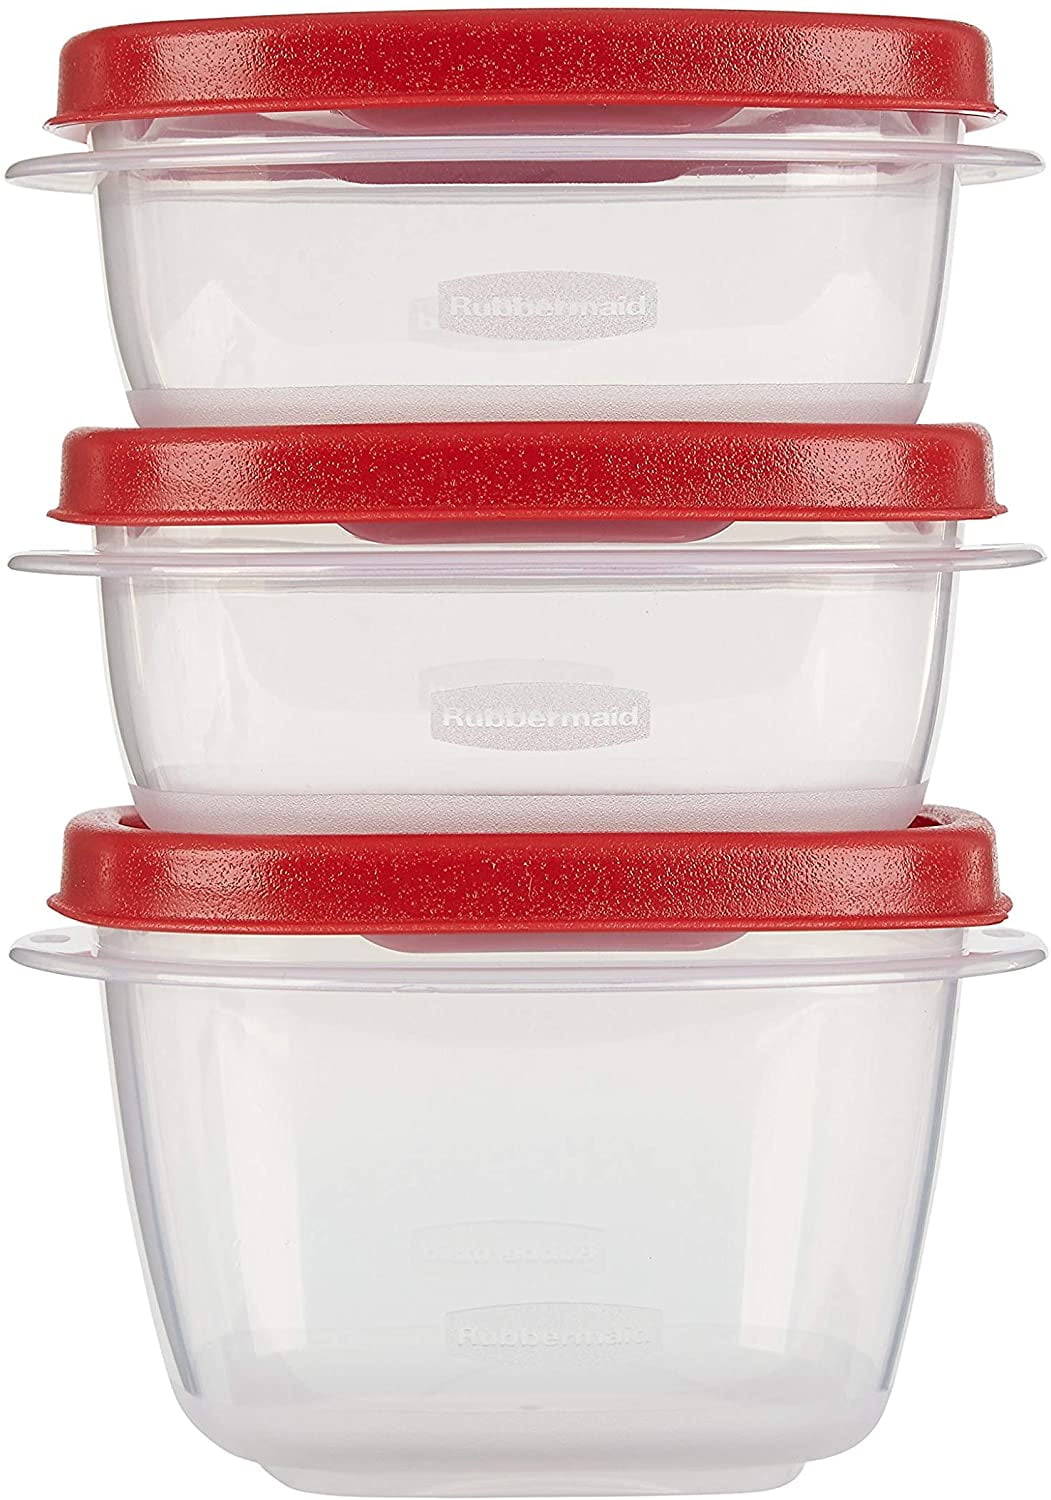 Rubbermaid Easy Find Lids Containers Value Pack, Set of 3